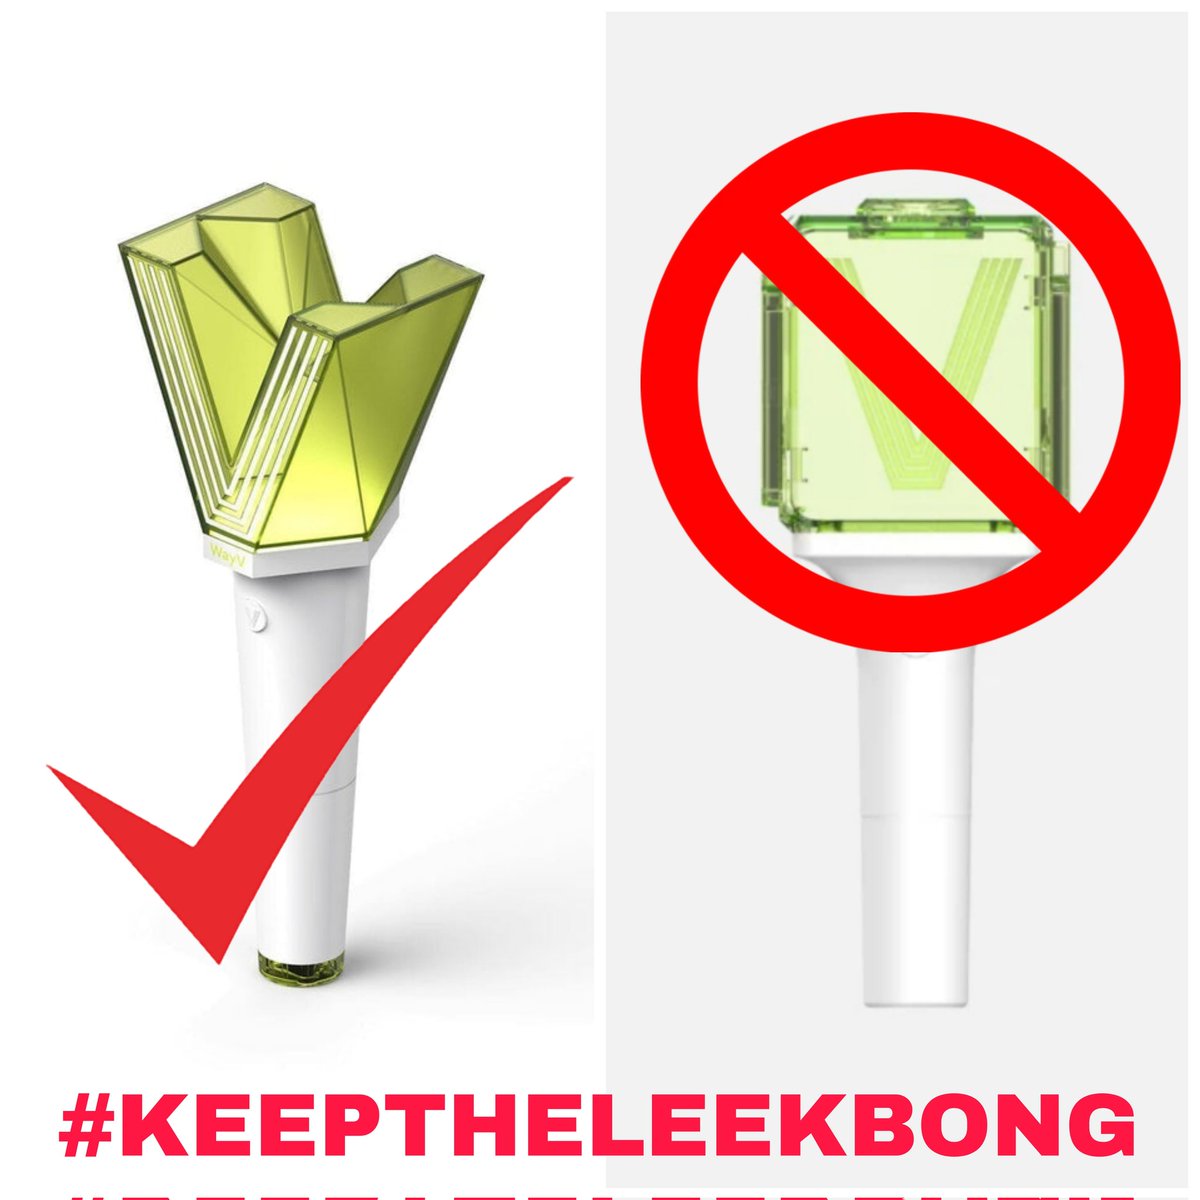 we don't care if you sell the ver. 2 lightstick, just keep restocking and don't discontinue the leekbong! let us have the freedom to choose our lightstick like how others do! 

KEEP THE V FOR WAYV 
#KEEPTHELEEKBONG